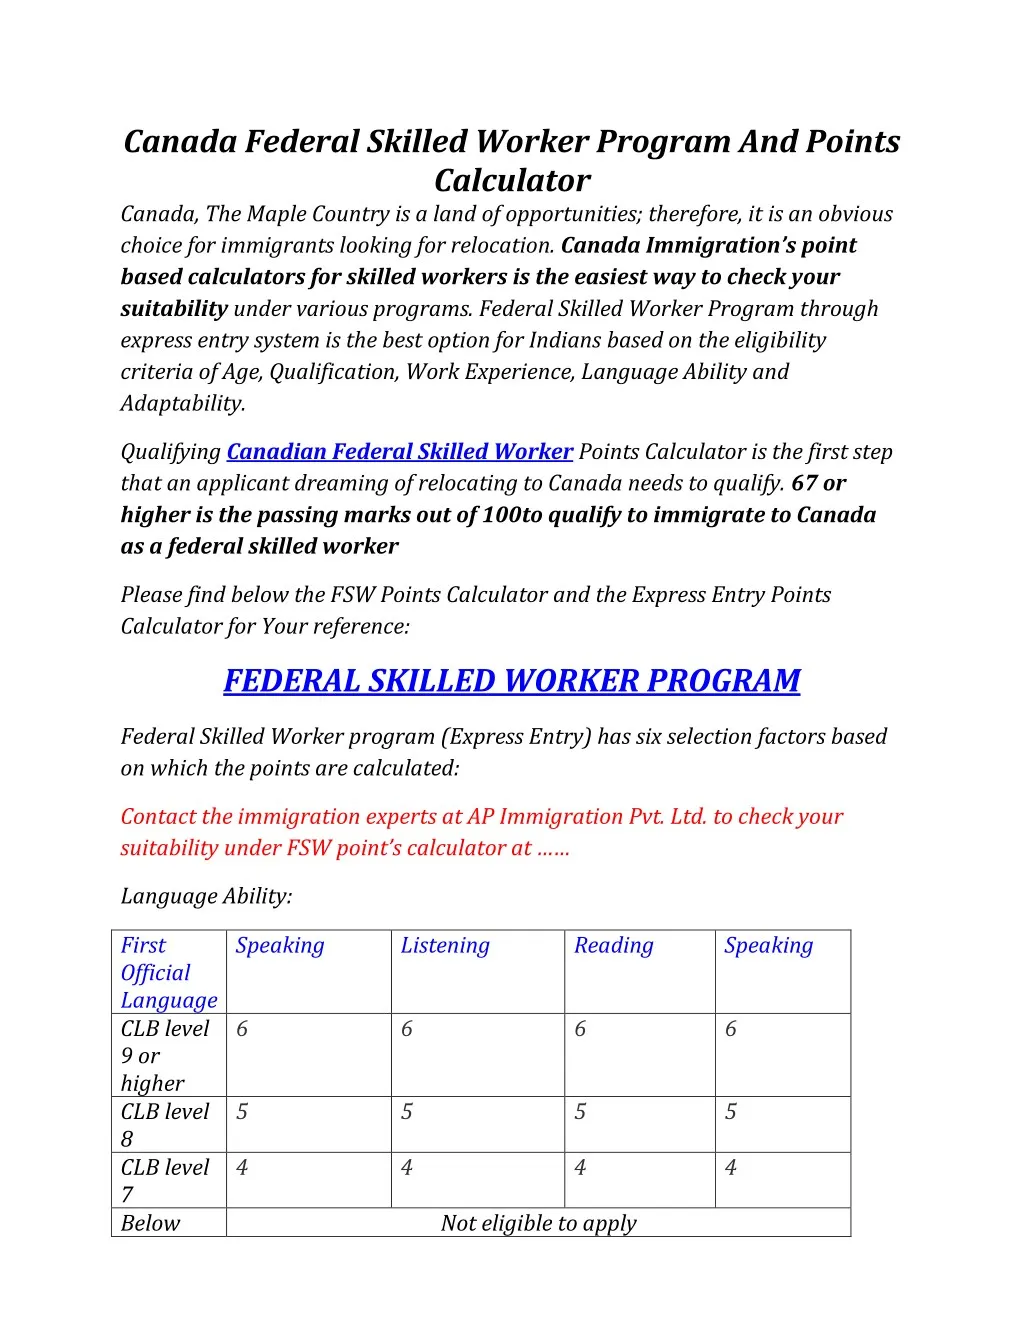 PPT Canada Federal Skilled Worker Program And Points Calculator